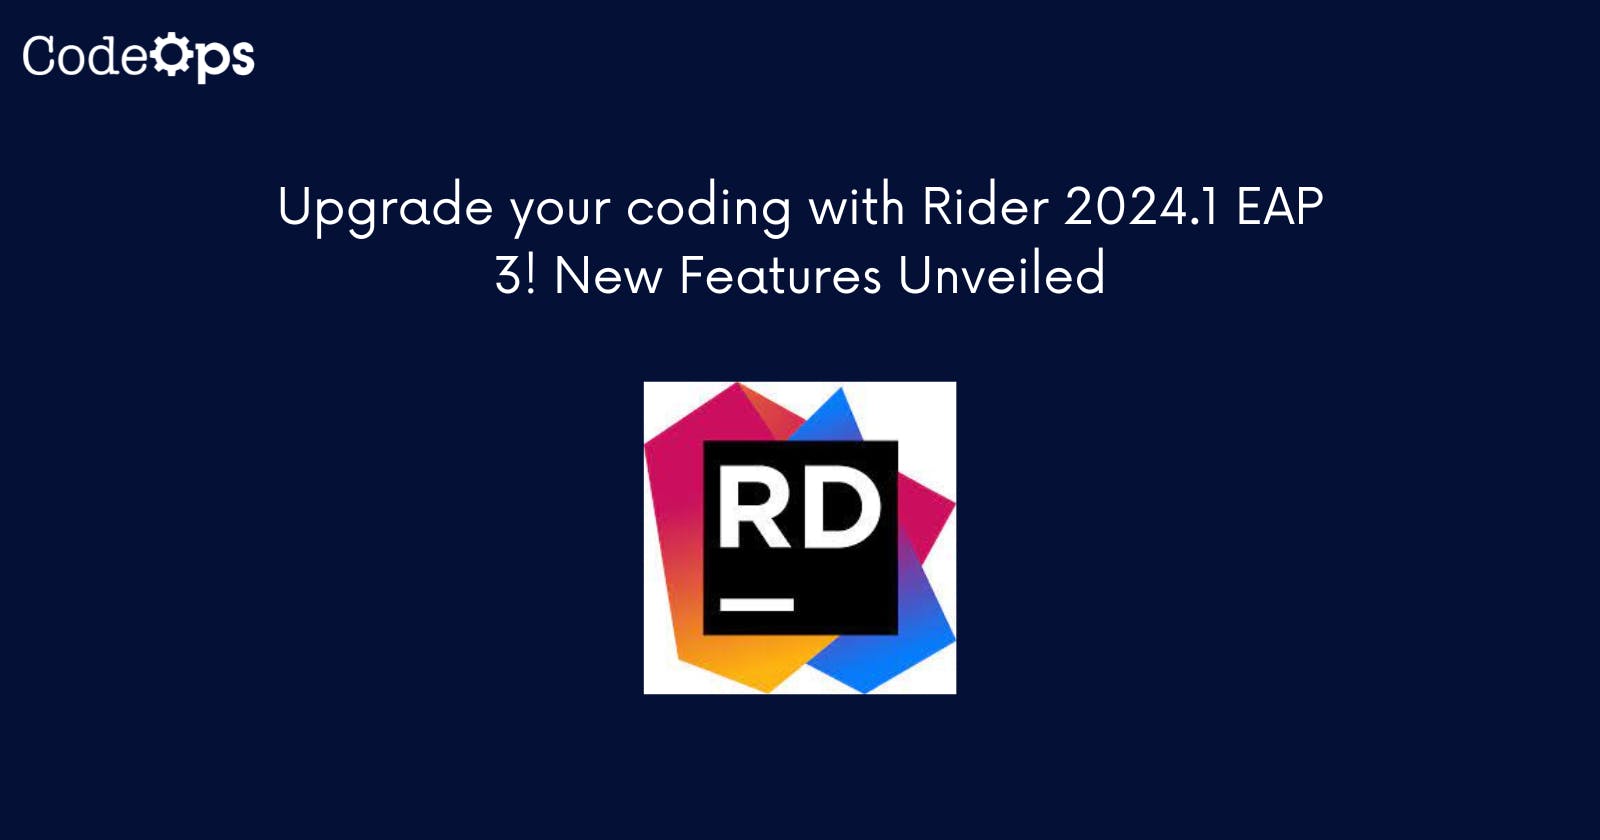 Upgrade your coding with Rider 2024.1 EAP 3! New Features Unveiled